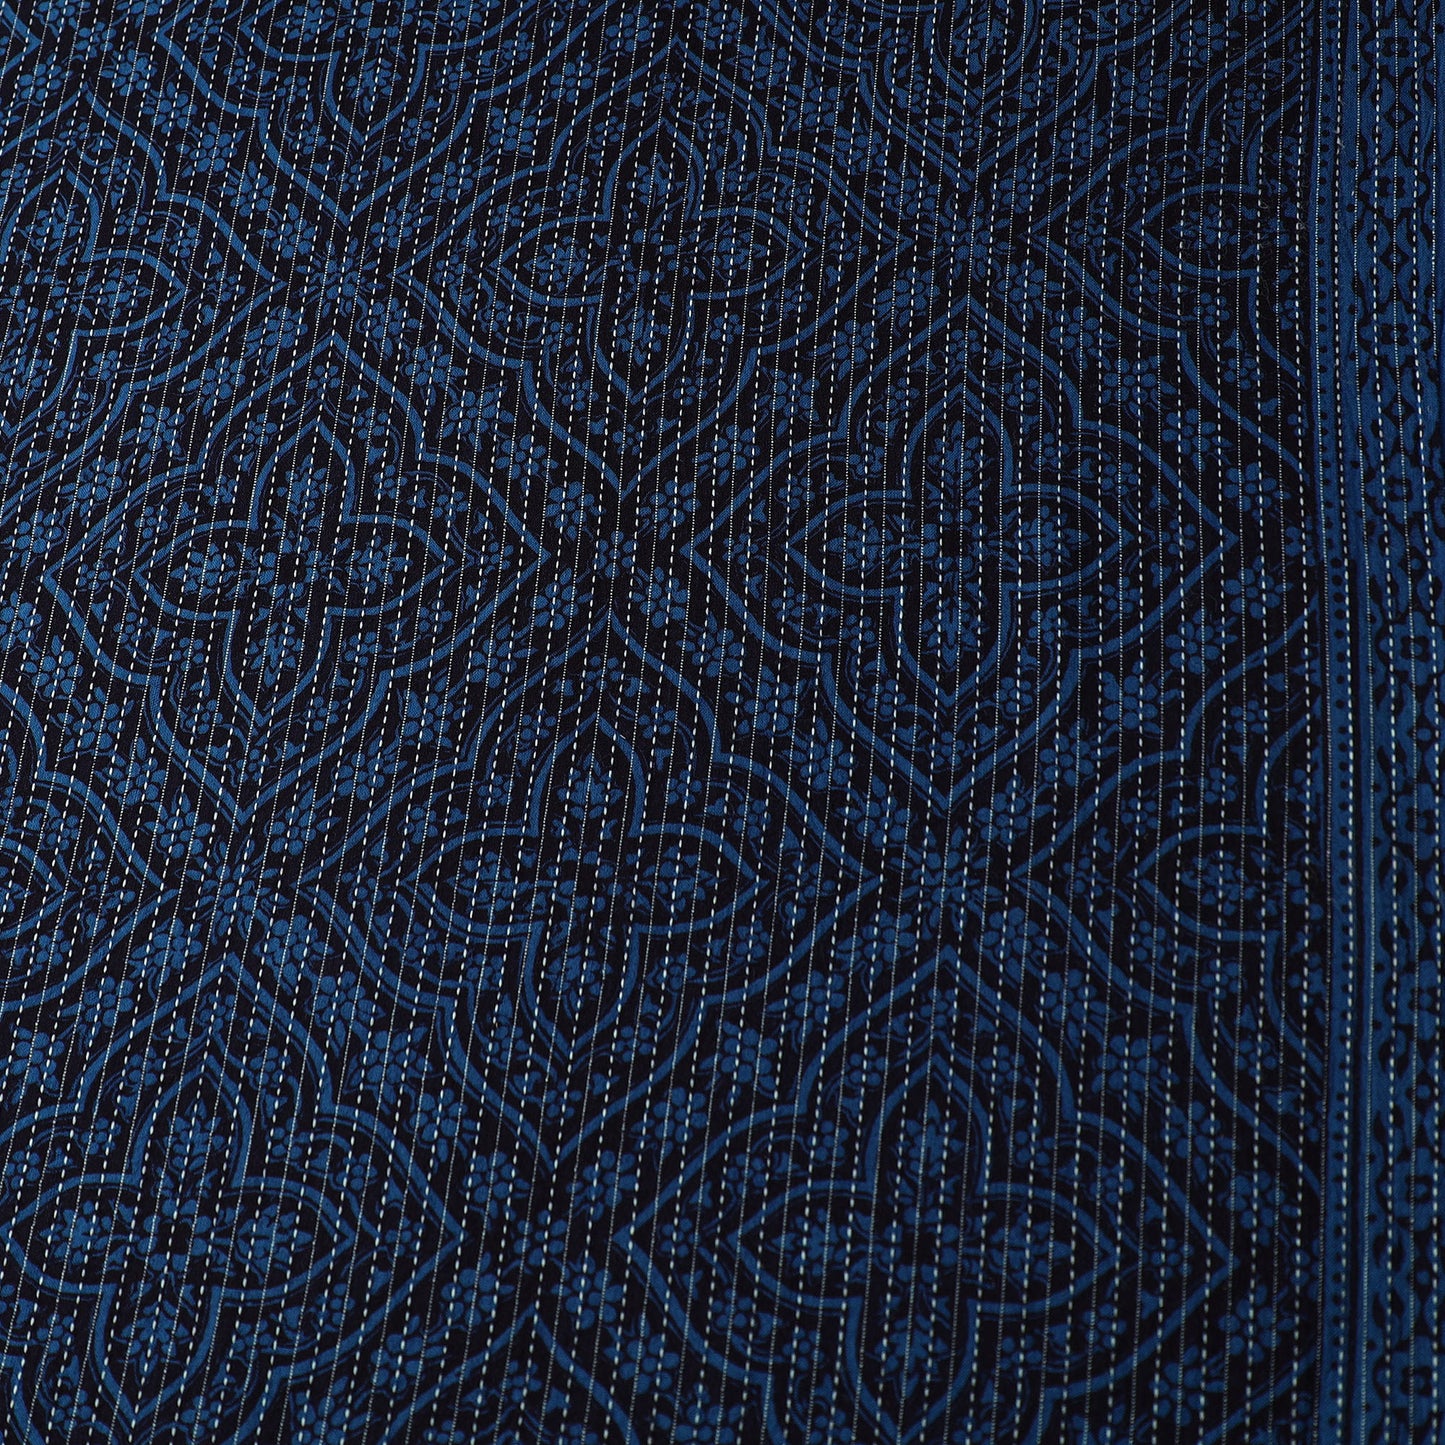 Blue - Bagh Block Printed Kantha Style Cotton Fabric 05